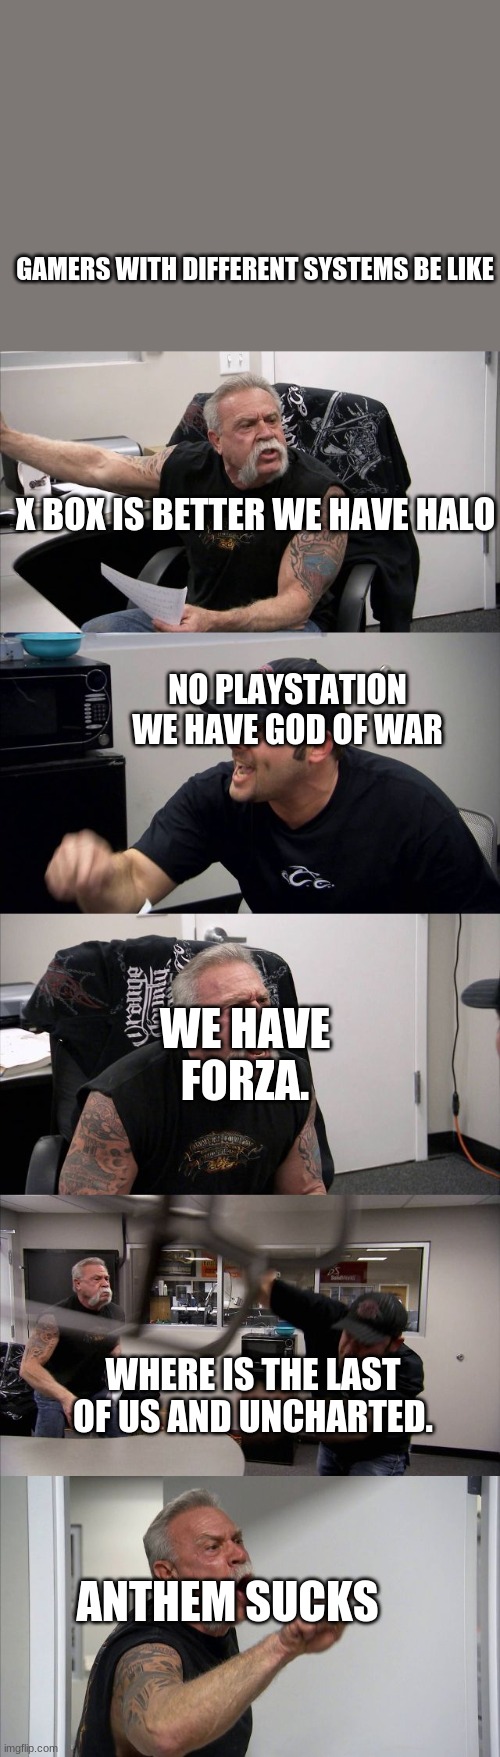 American Chopper Argument Meme | GAMERS WITH DIFFERENT SYSTEMS BE LIKE; X BOX IS BETTER WE HAVE HALO; NO PLAYSTATION WE HAVE GOD OF WAR; WE HAVE FORZA. WHERE IS THE LAST OF US AND UNCHARTED. ANTHEM SUCKS | image tagged in memes,american chopper argument | made w/ Imgflip meme maker